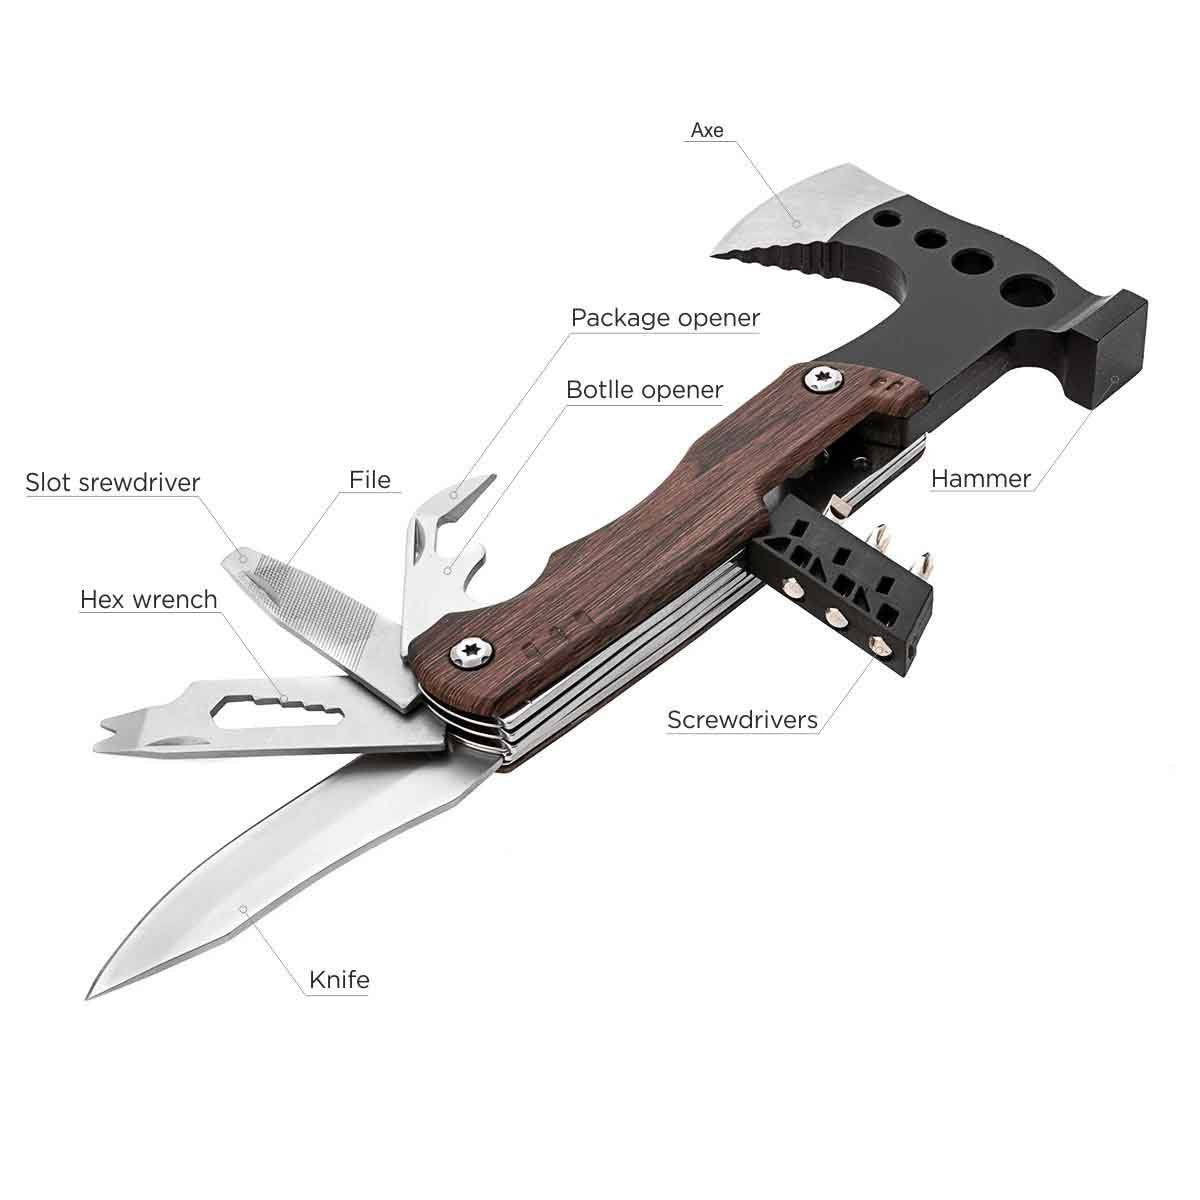 Portable 10-in-1 Axe Multitool for Home and Outdoor contains hex wrench, screwdriver bits, hammer, ax, pakage and bottle opener, knife and file